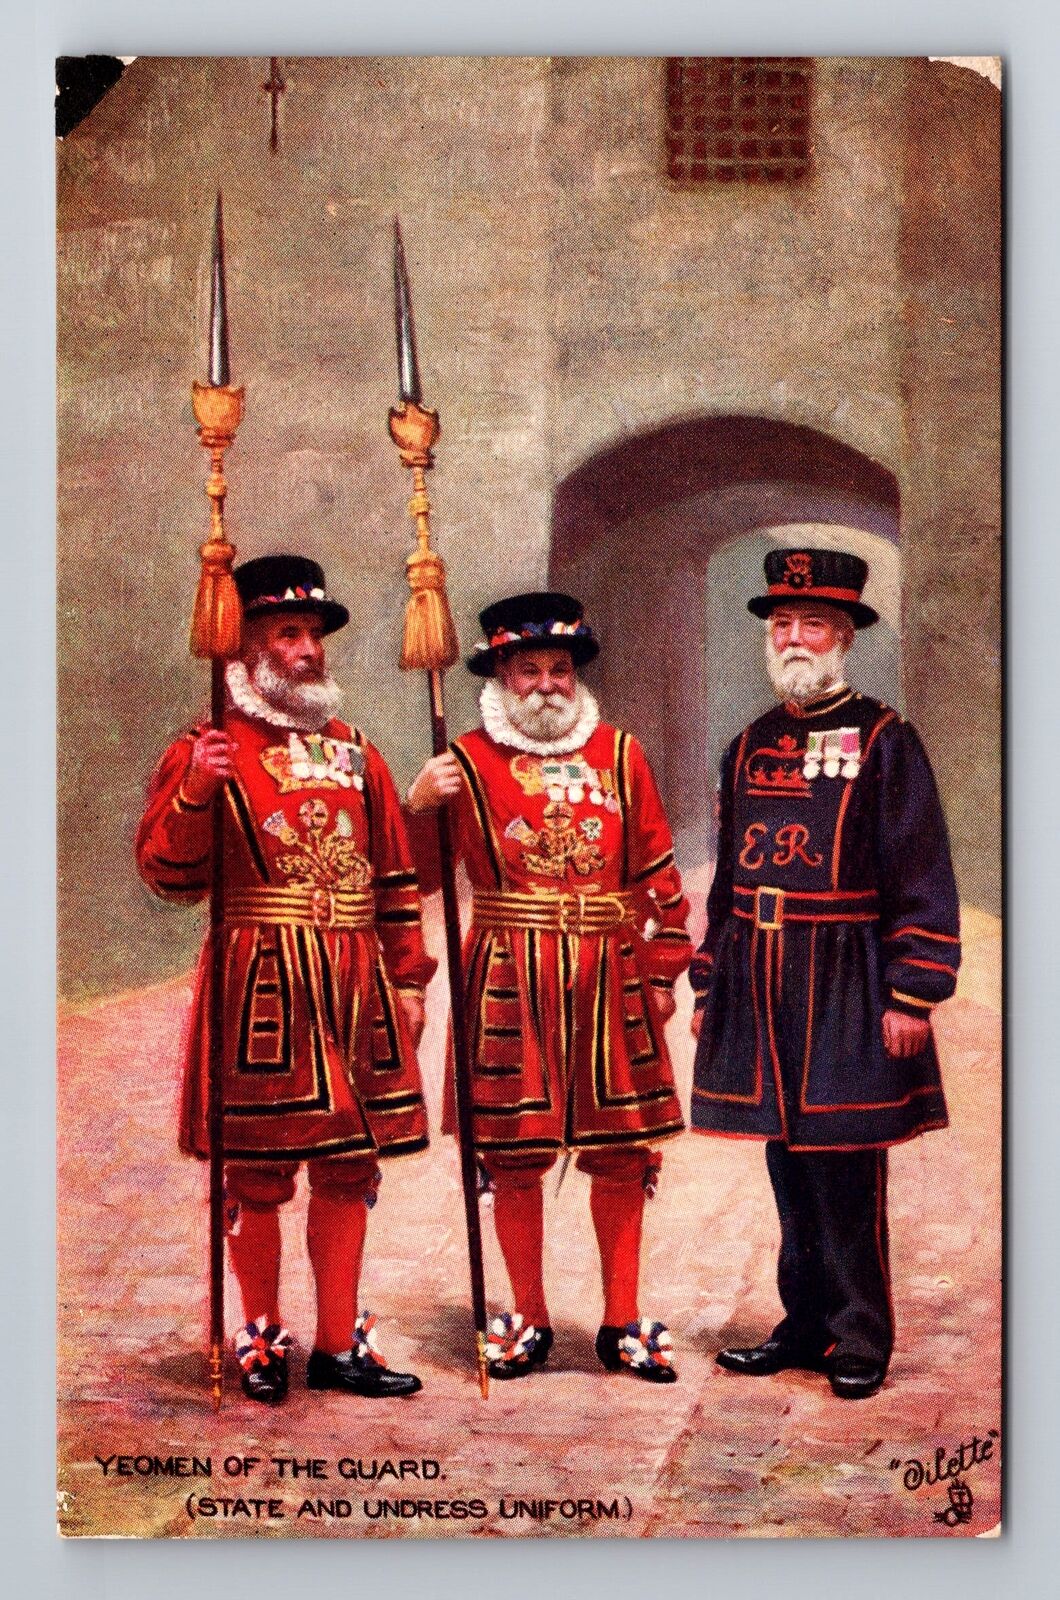 England, Yeomen of the Guard, State and Undress Uniform, Vintage Postcard